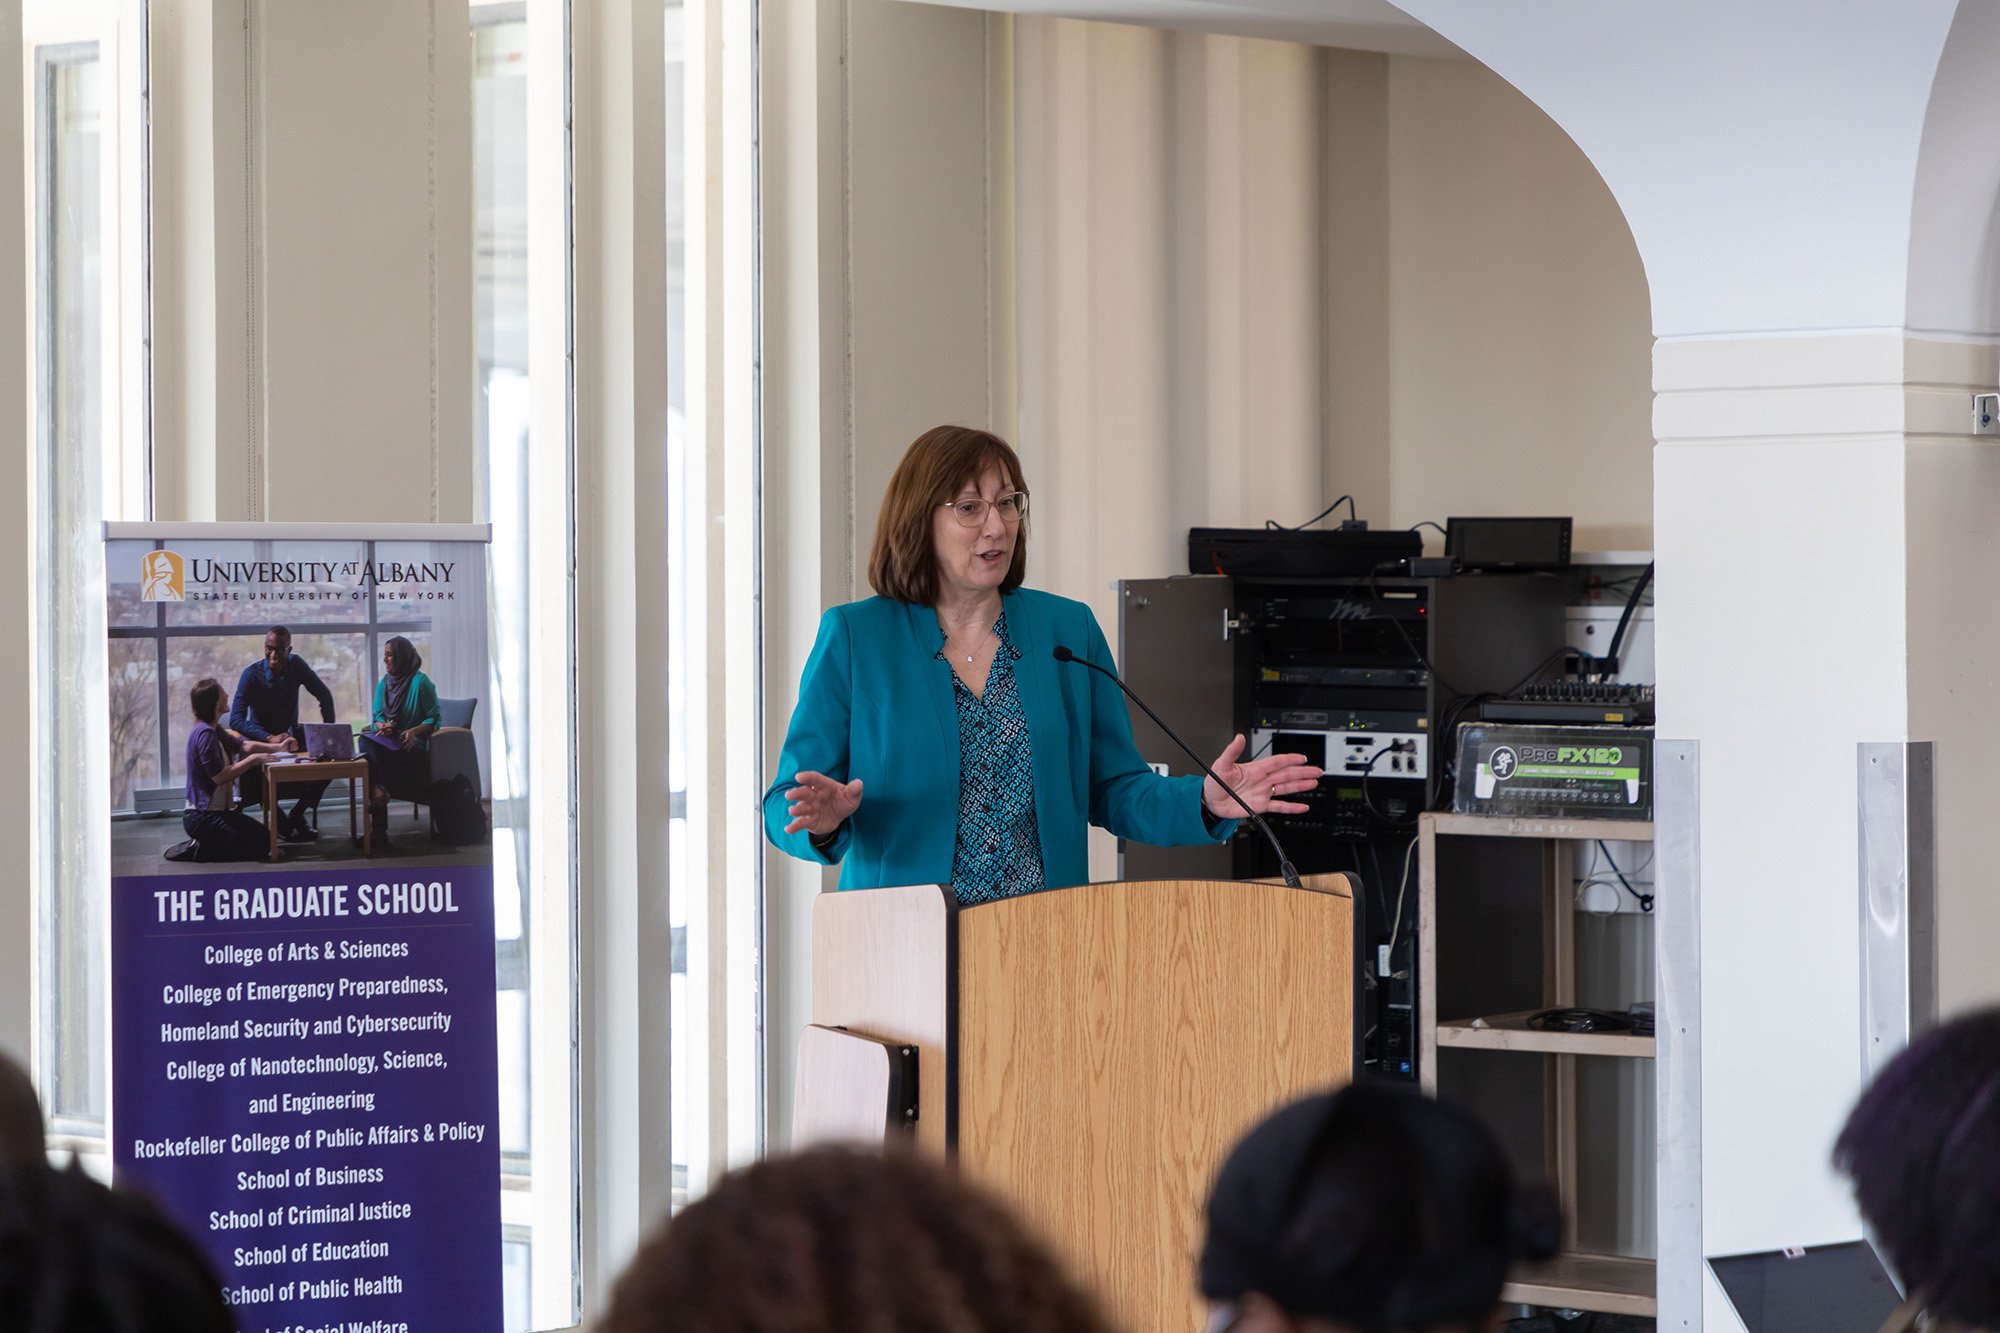 nterim Vice Provost and Dean of the Graduate School Christine K. Wagner welcomes the audience at UAlbany's 3-Minute Thesis competition finals on March 14.